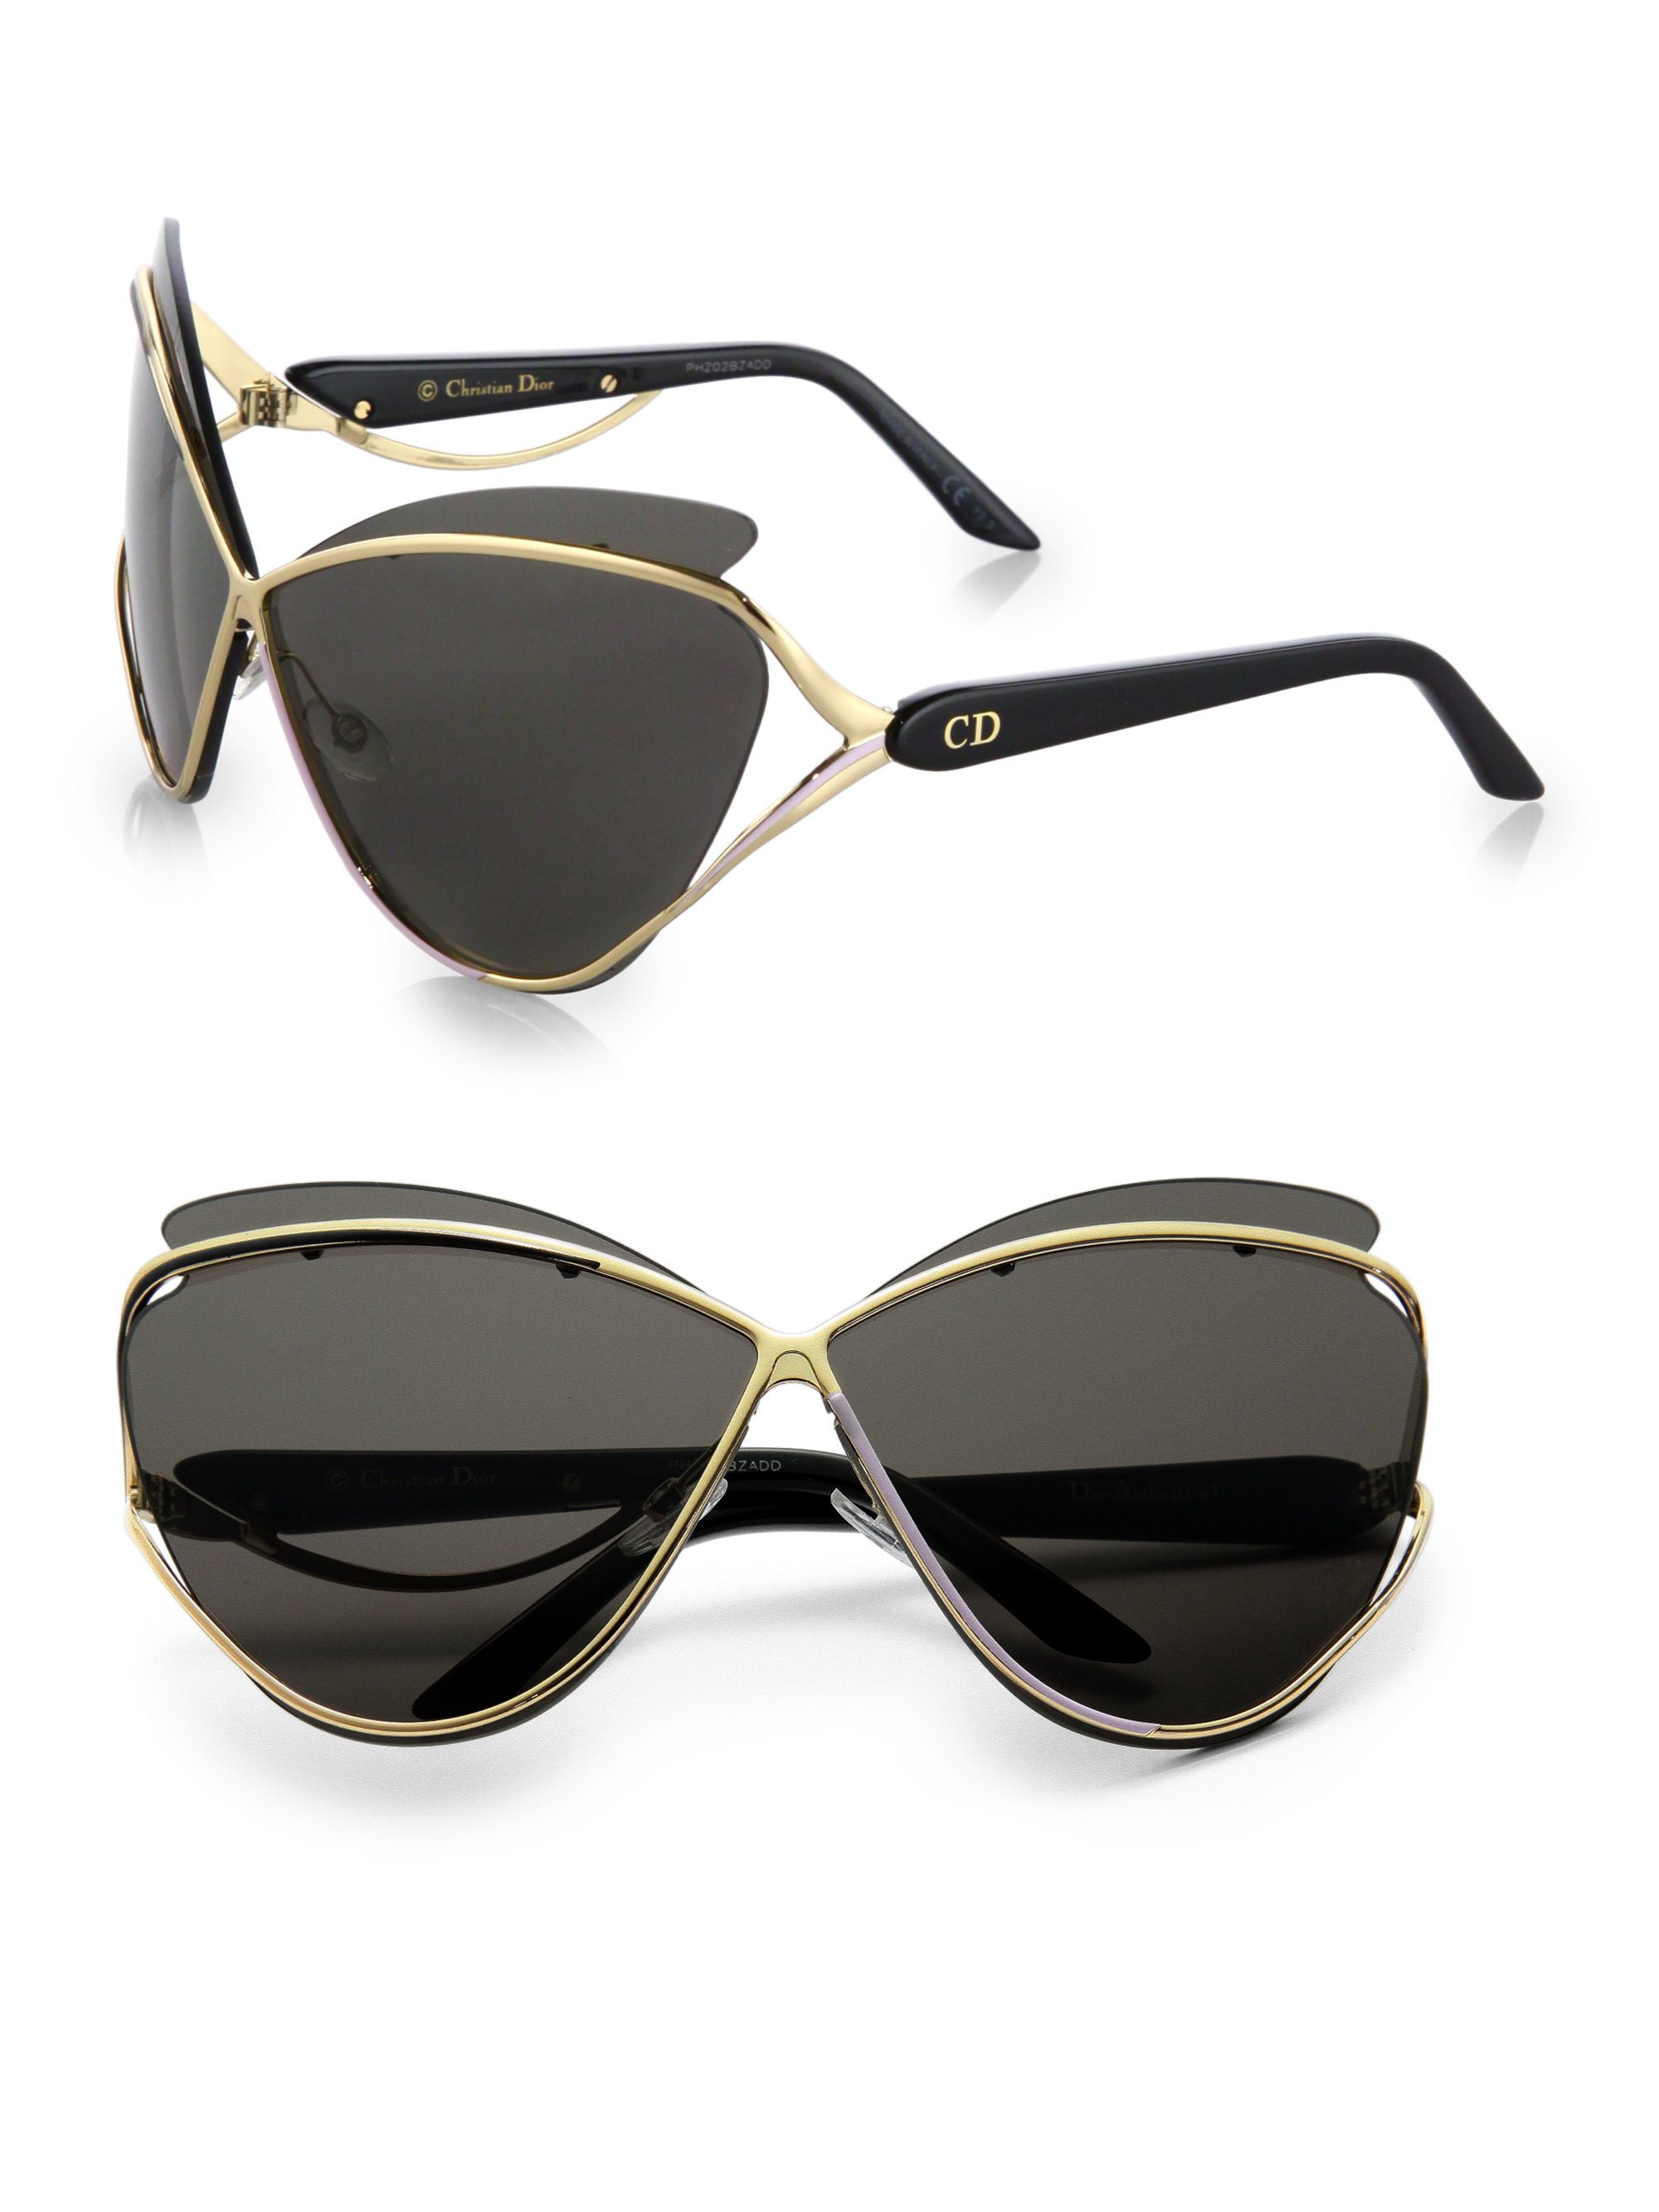 Lyst - Dior Exaggerated Two-tone Cat's-eye Sunglasses in Black